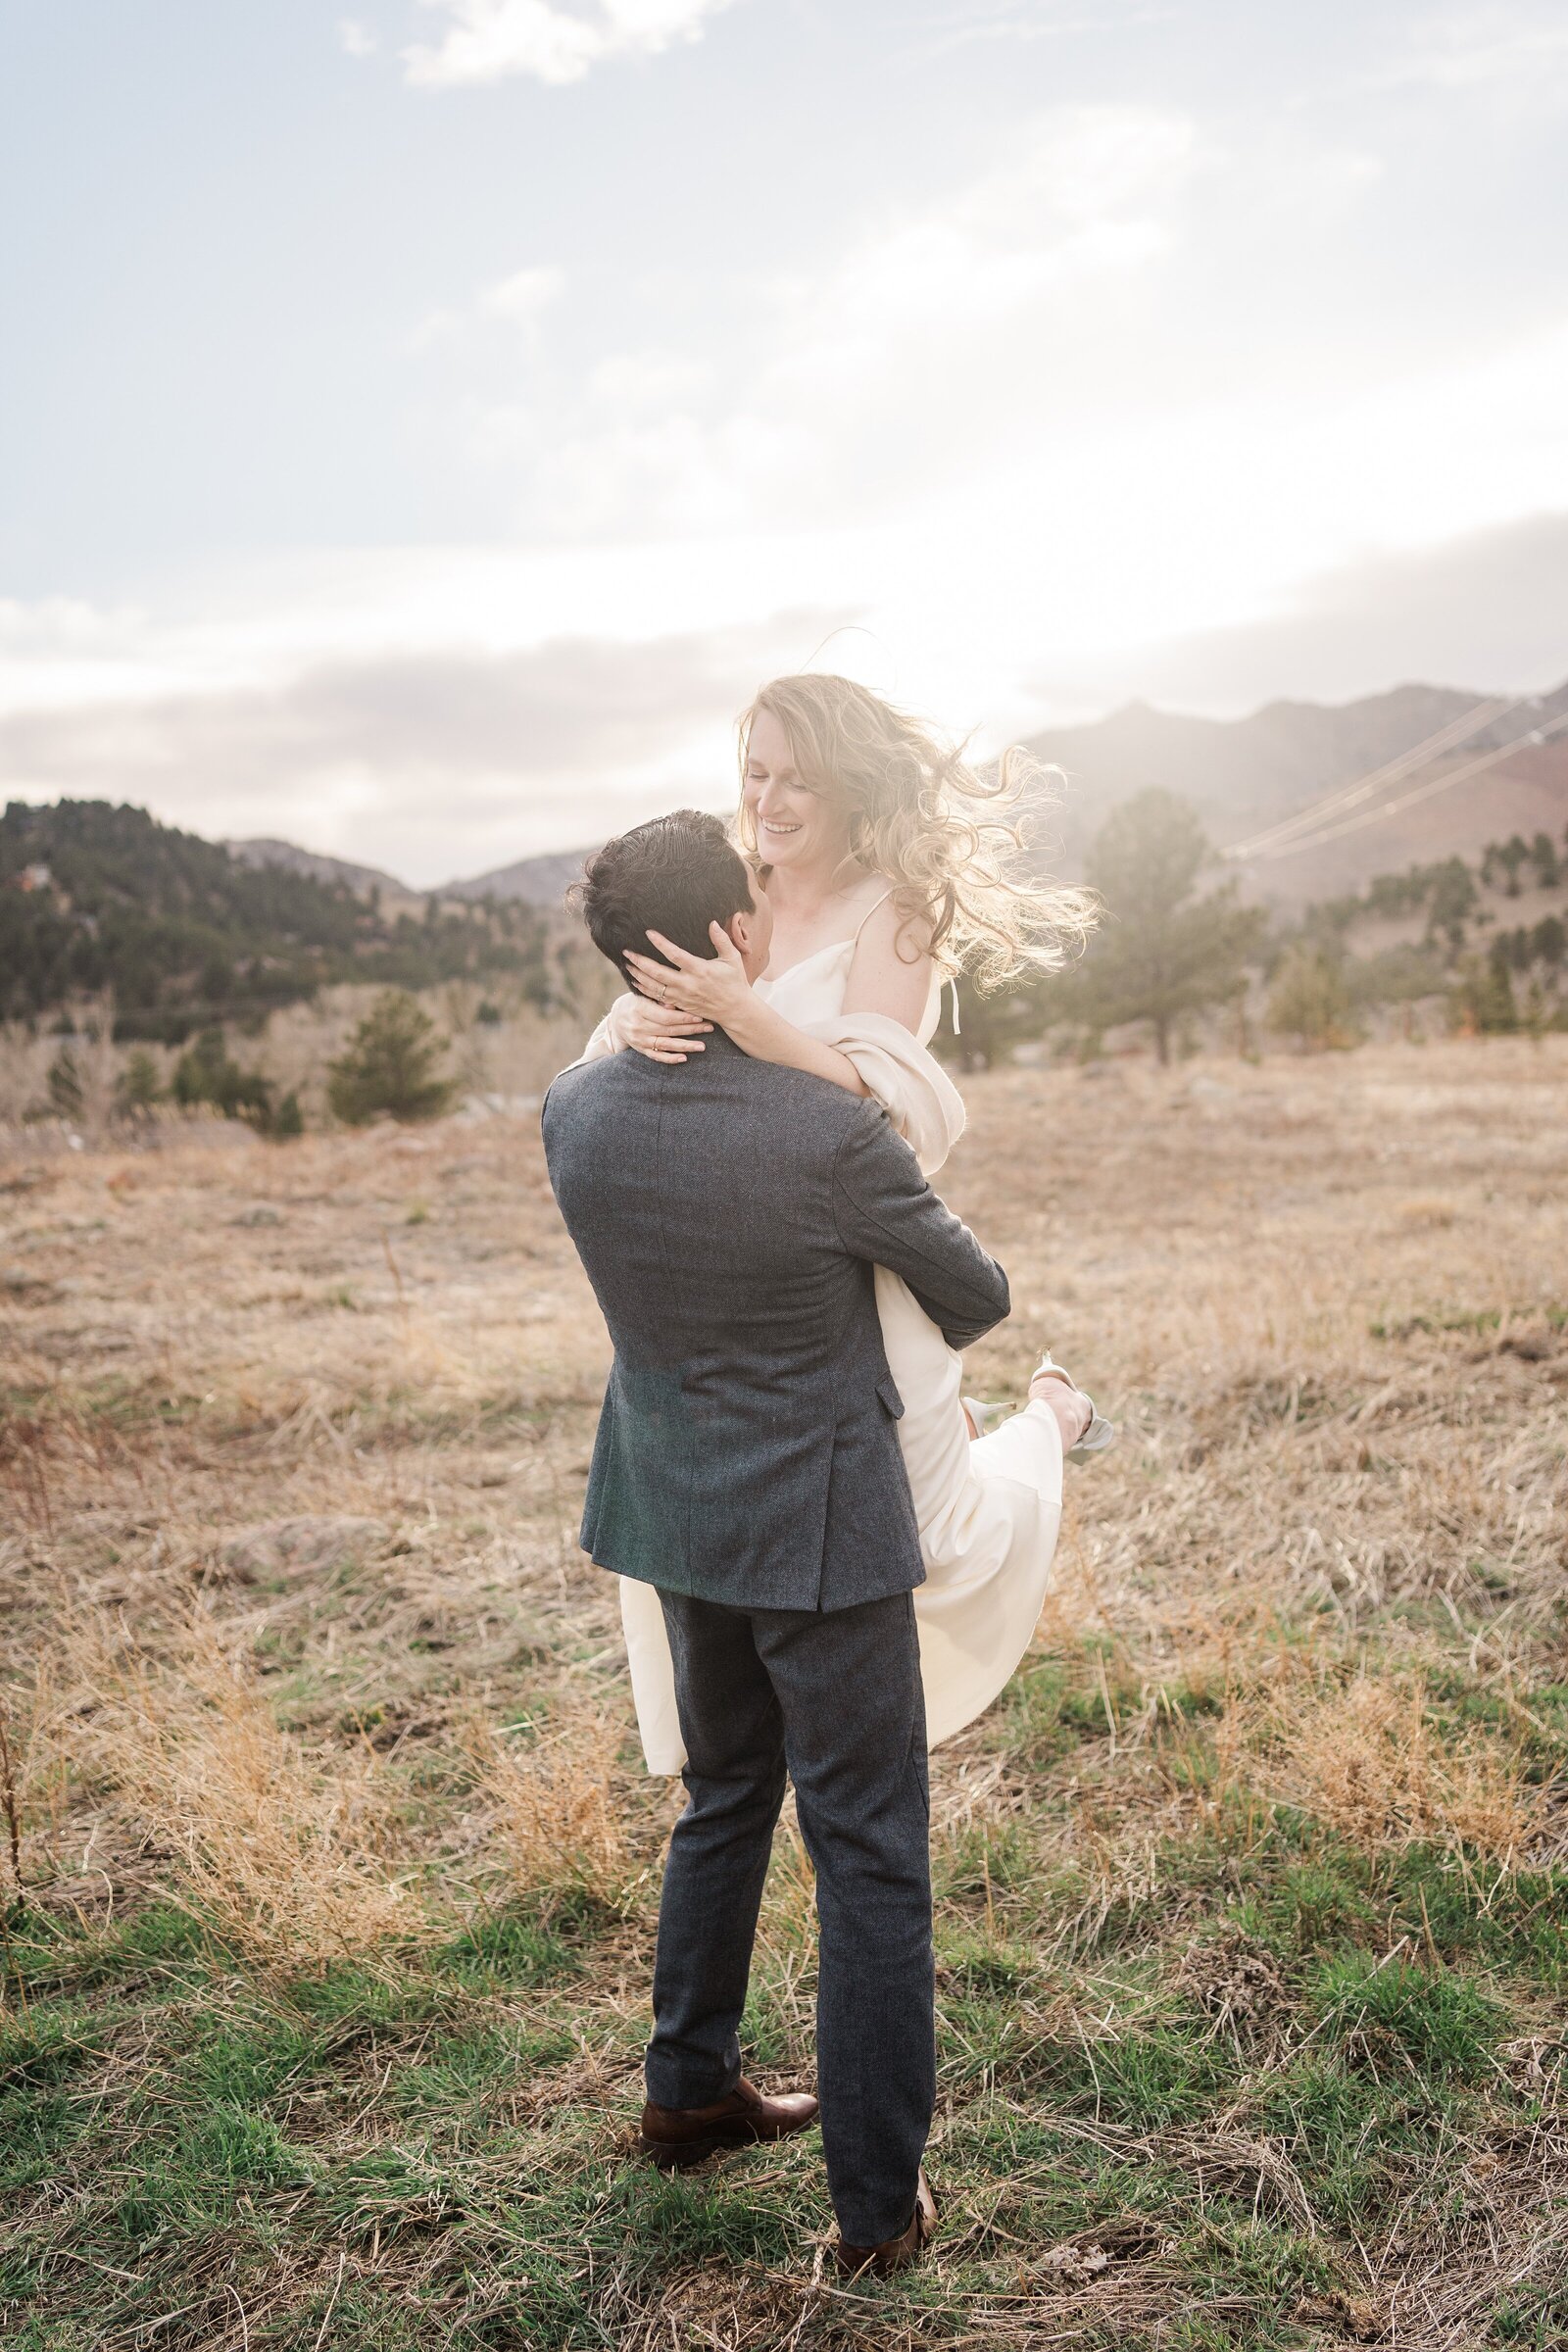 Let Samantha Immer Photography, your experienced Colorado wedding photographer, tell your love story with authentic and documentary-style wedding photos. Your special day is one-of-a-kind and deserves to be captured with intentionality.